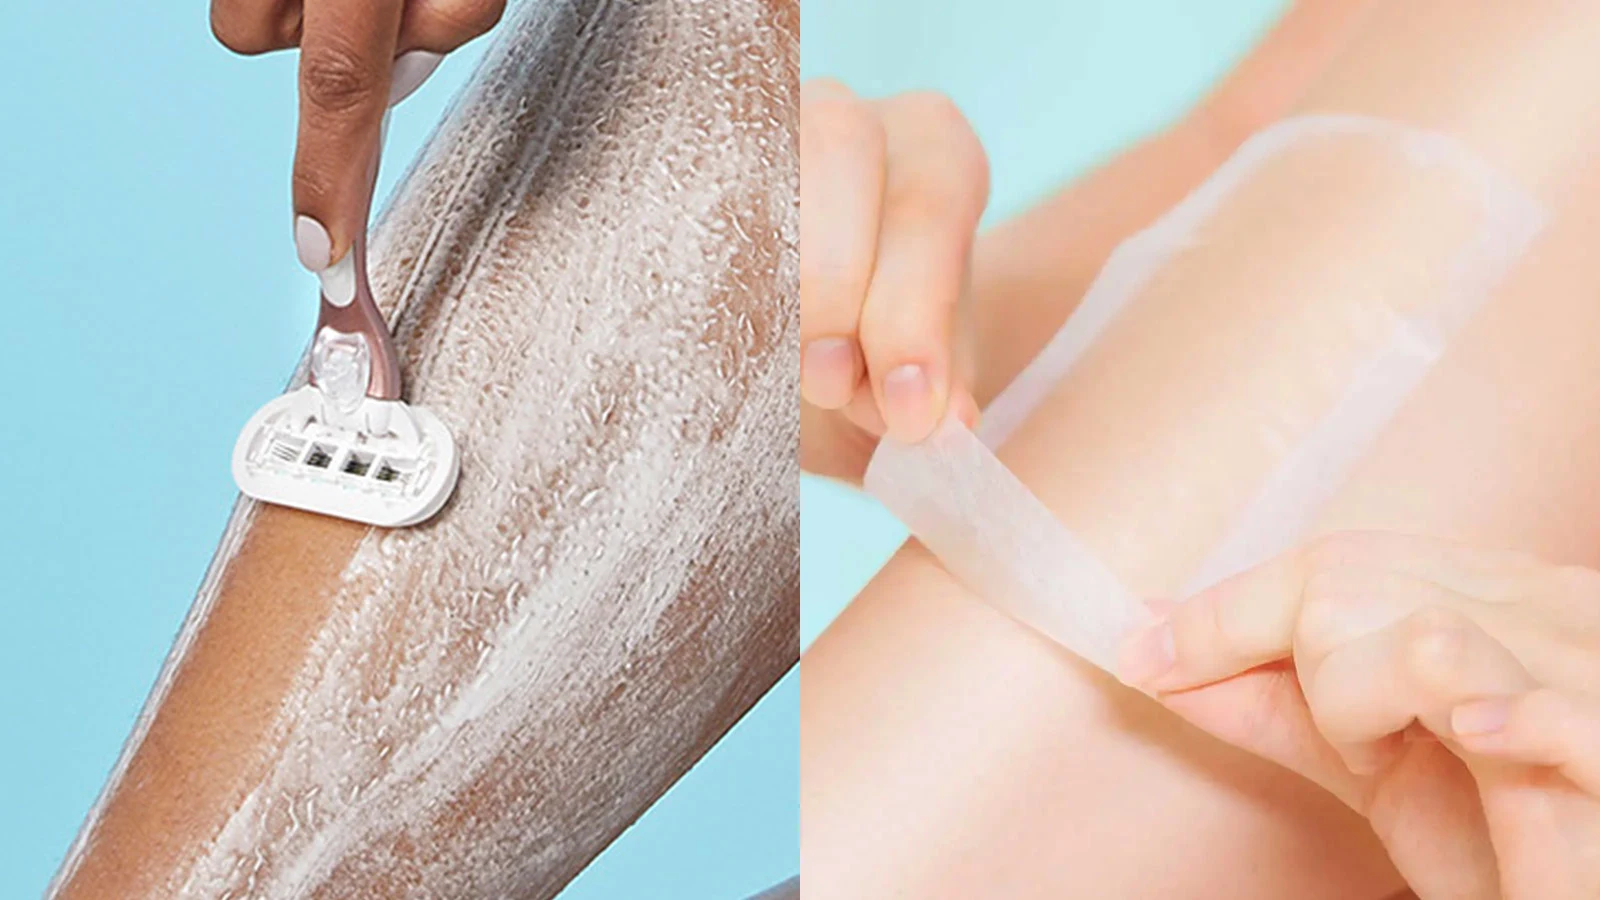 How To Remove Your Body Hair At Home To Get Silky Smooth Skin?